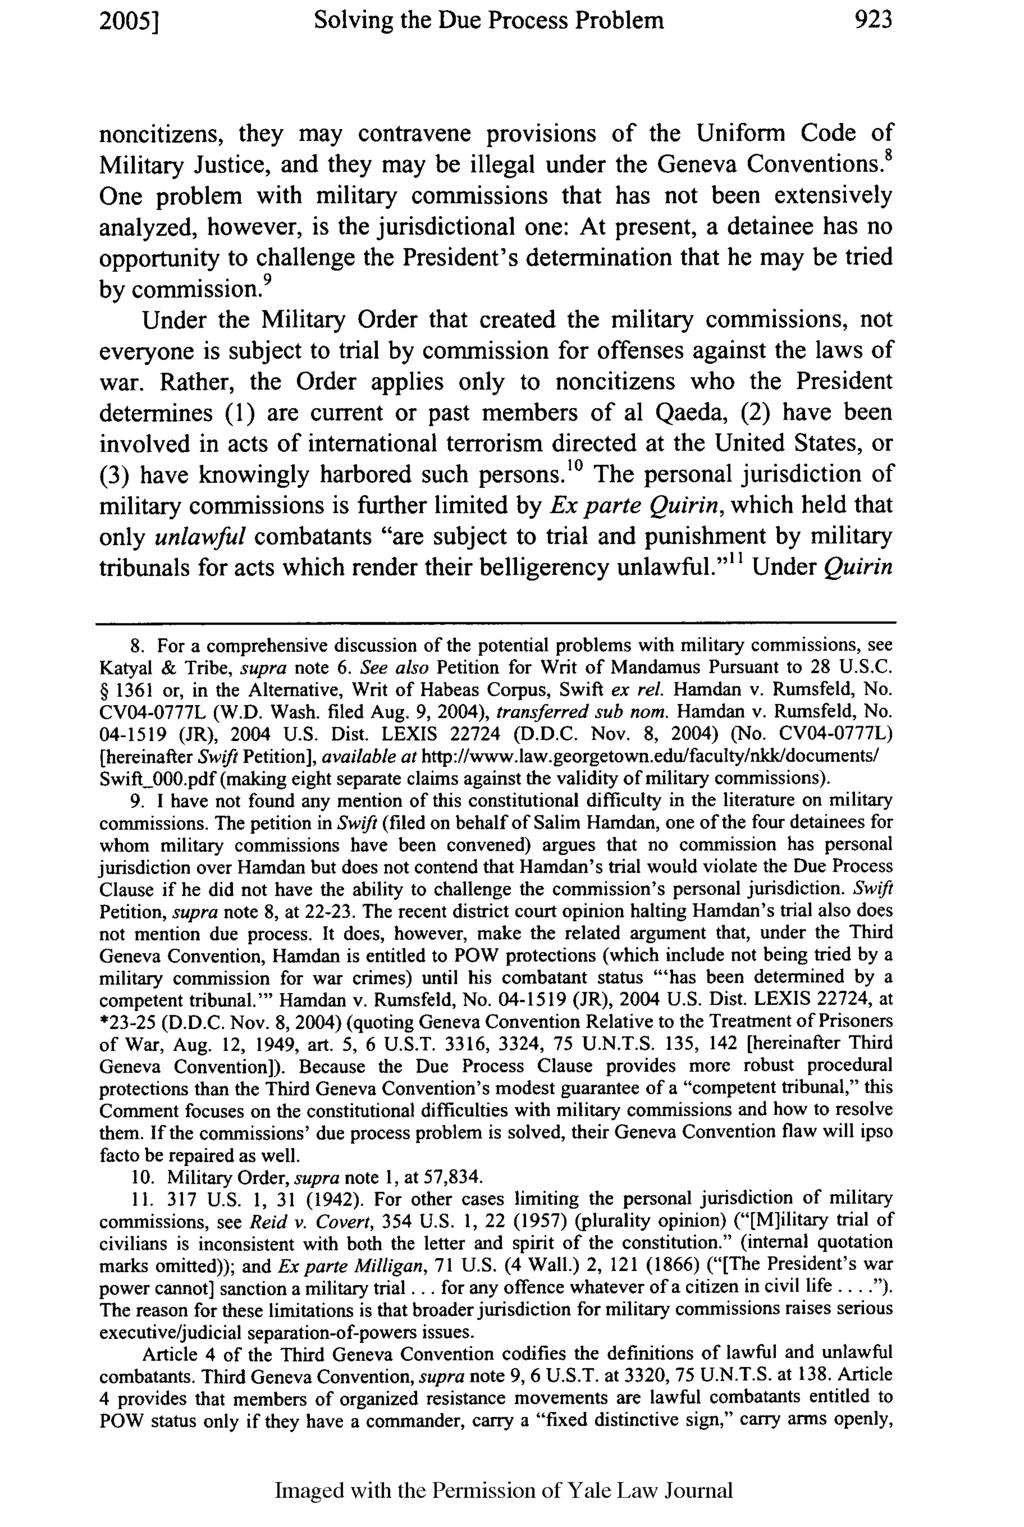 2005] Solving the Due Process Problem noncitizens, they may contravene provisions of the Uniform Code of Military Justice, and they may be illegal under the Geneva Conventions.